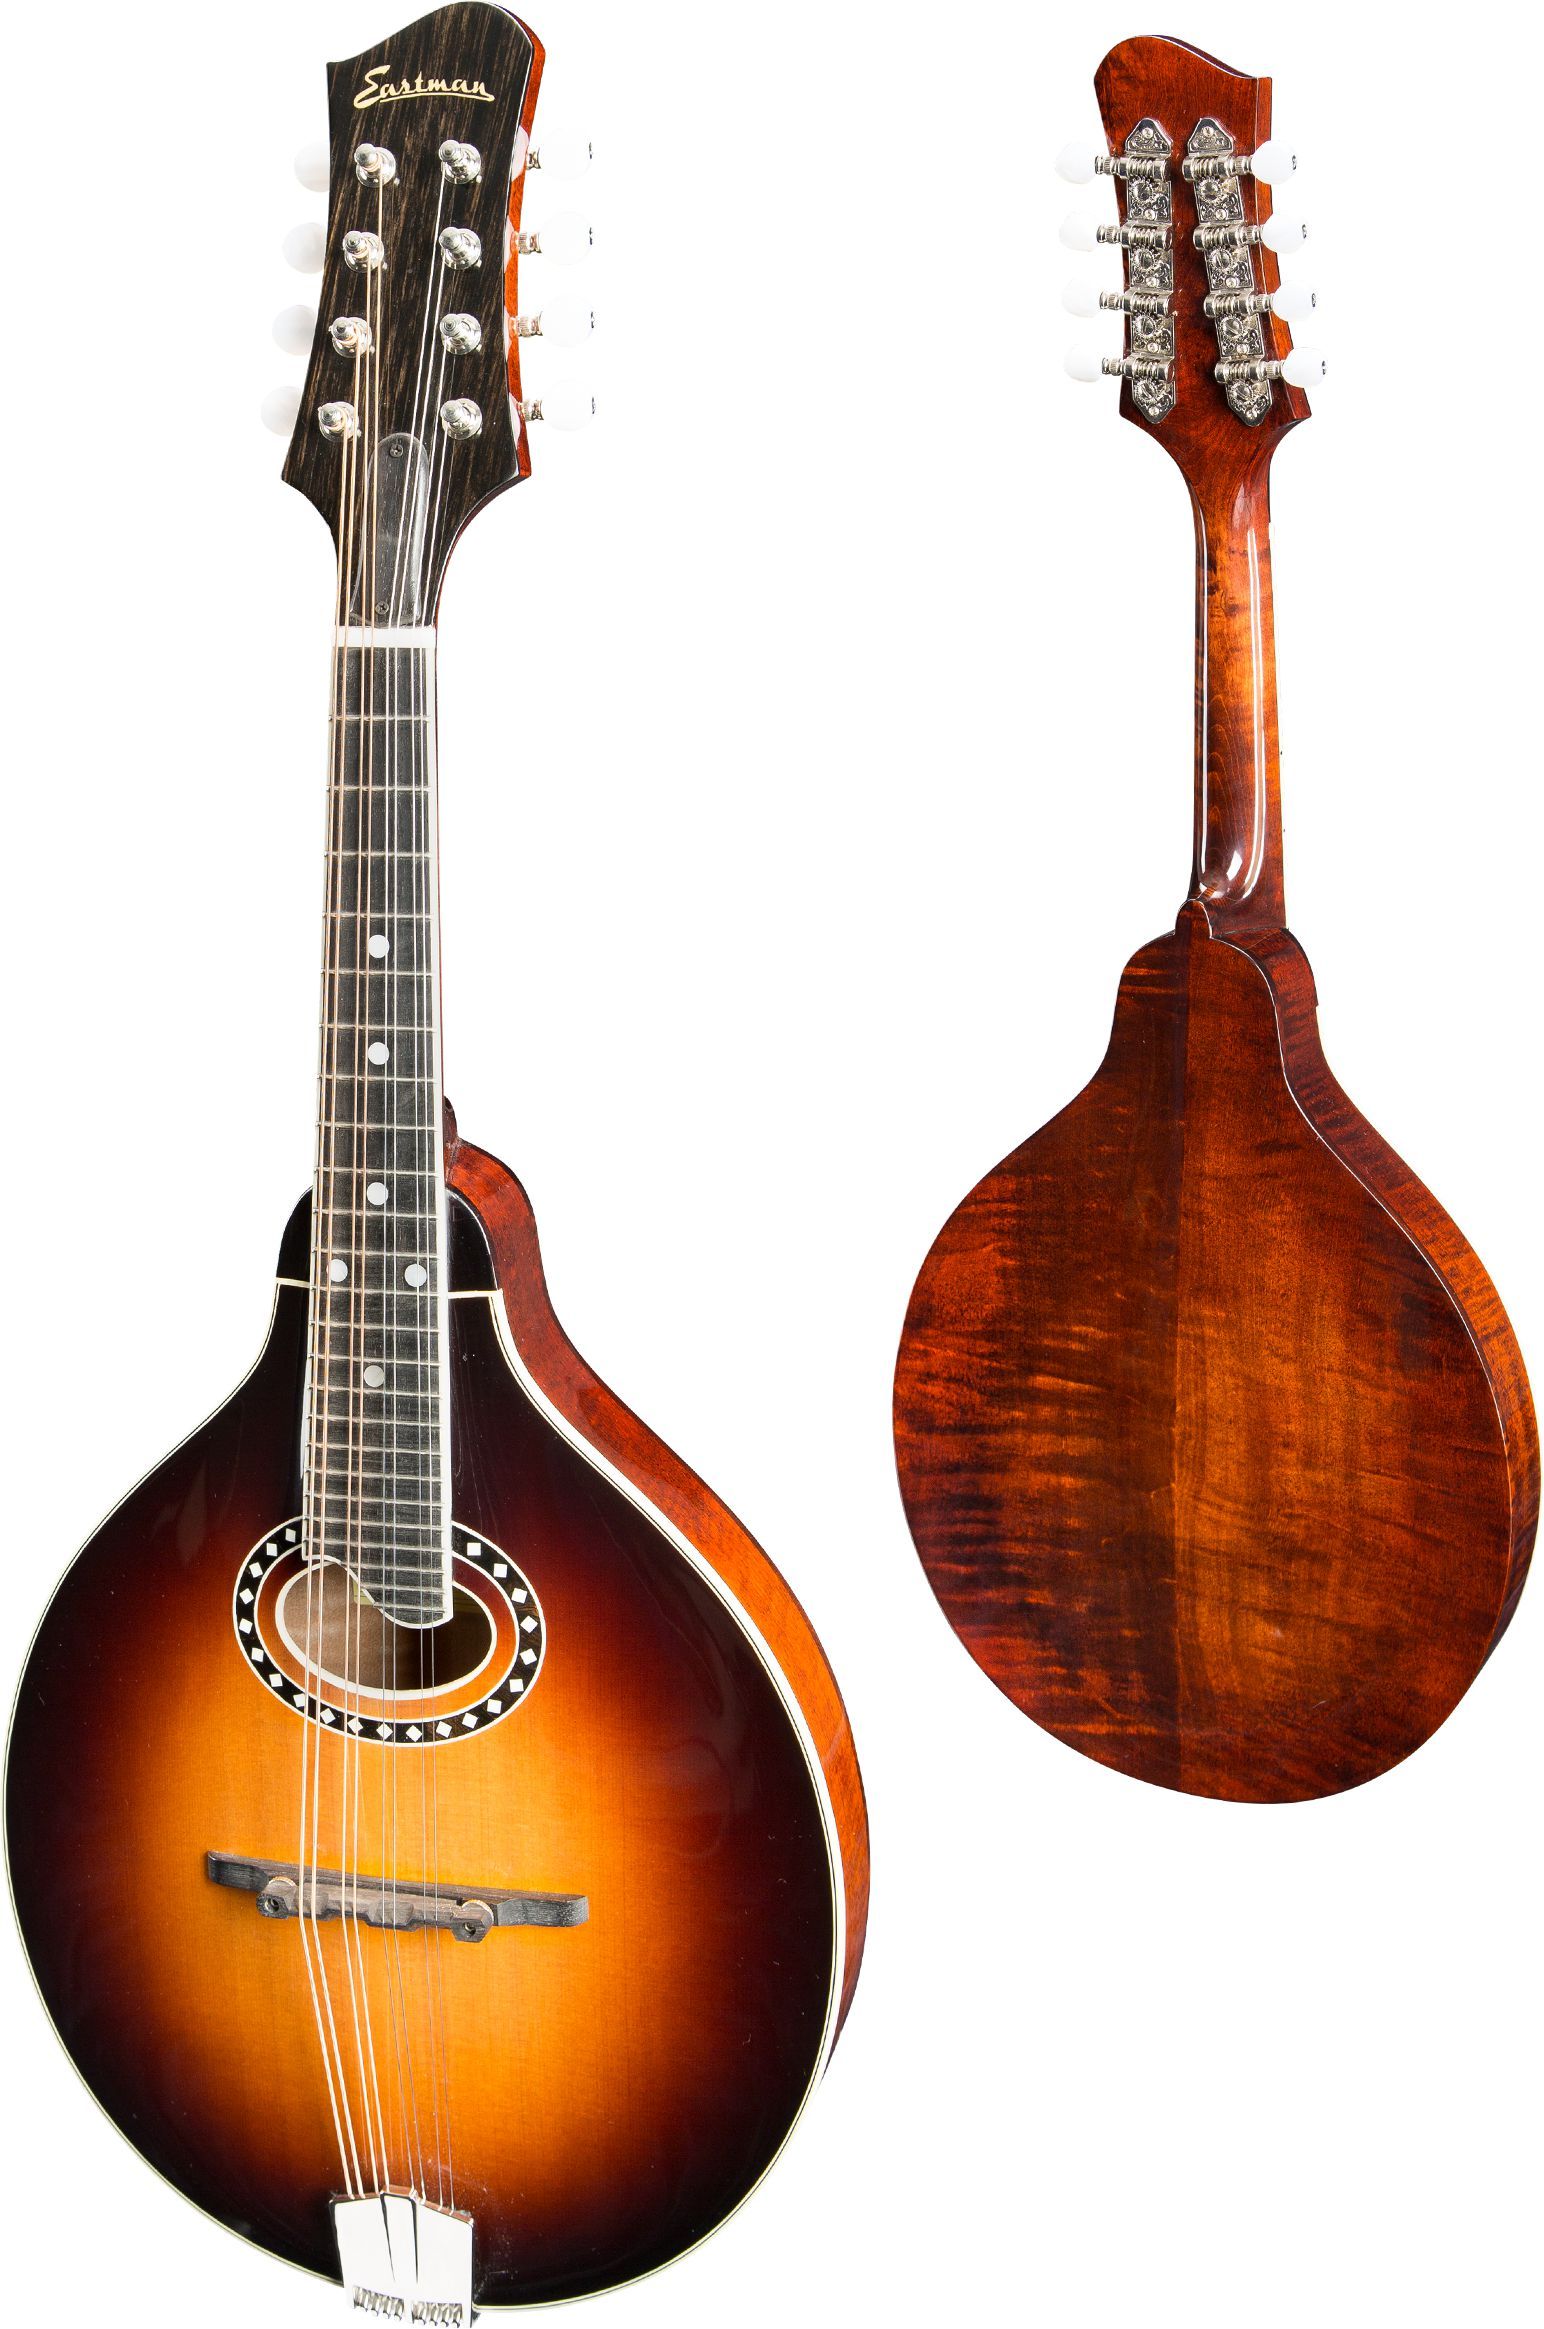 Eastman MD504 A-style Mandolin (oval hole, Solid Spruce top, Solid Maple back and sides, w/Case), Mandolin for sale at Richards Guitars.